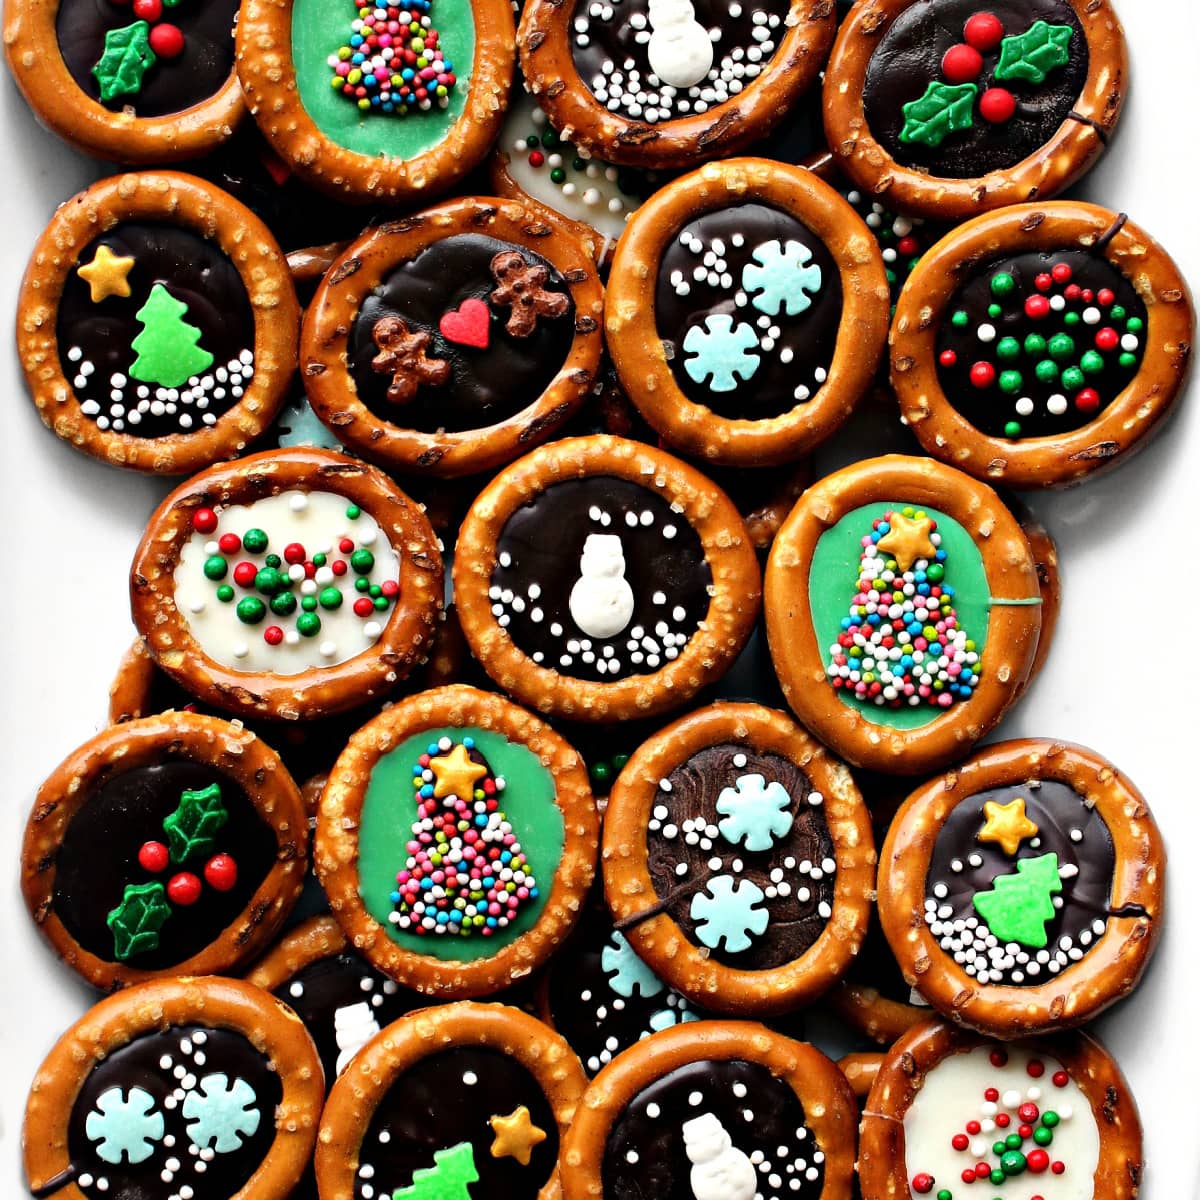 Closeup of decorated ring pretzels with many different designs made with sprinkles on chocolate.